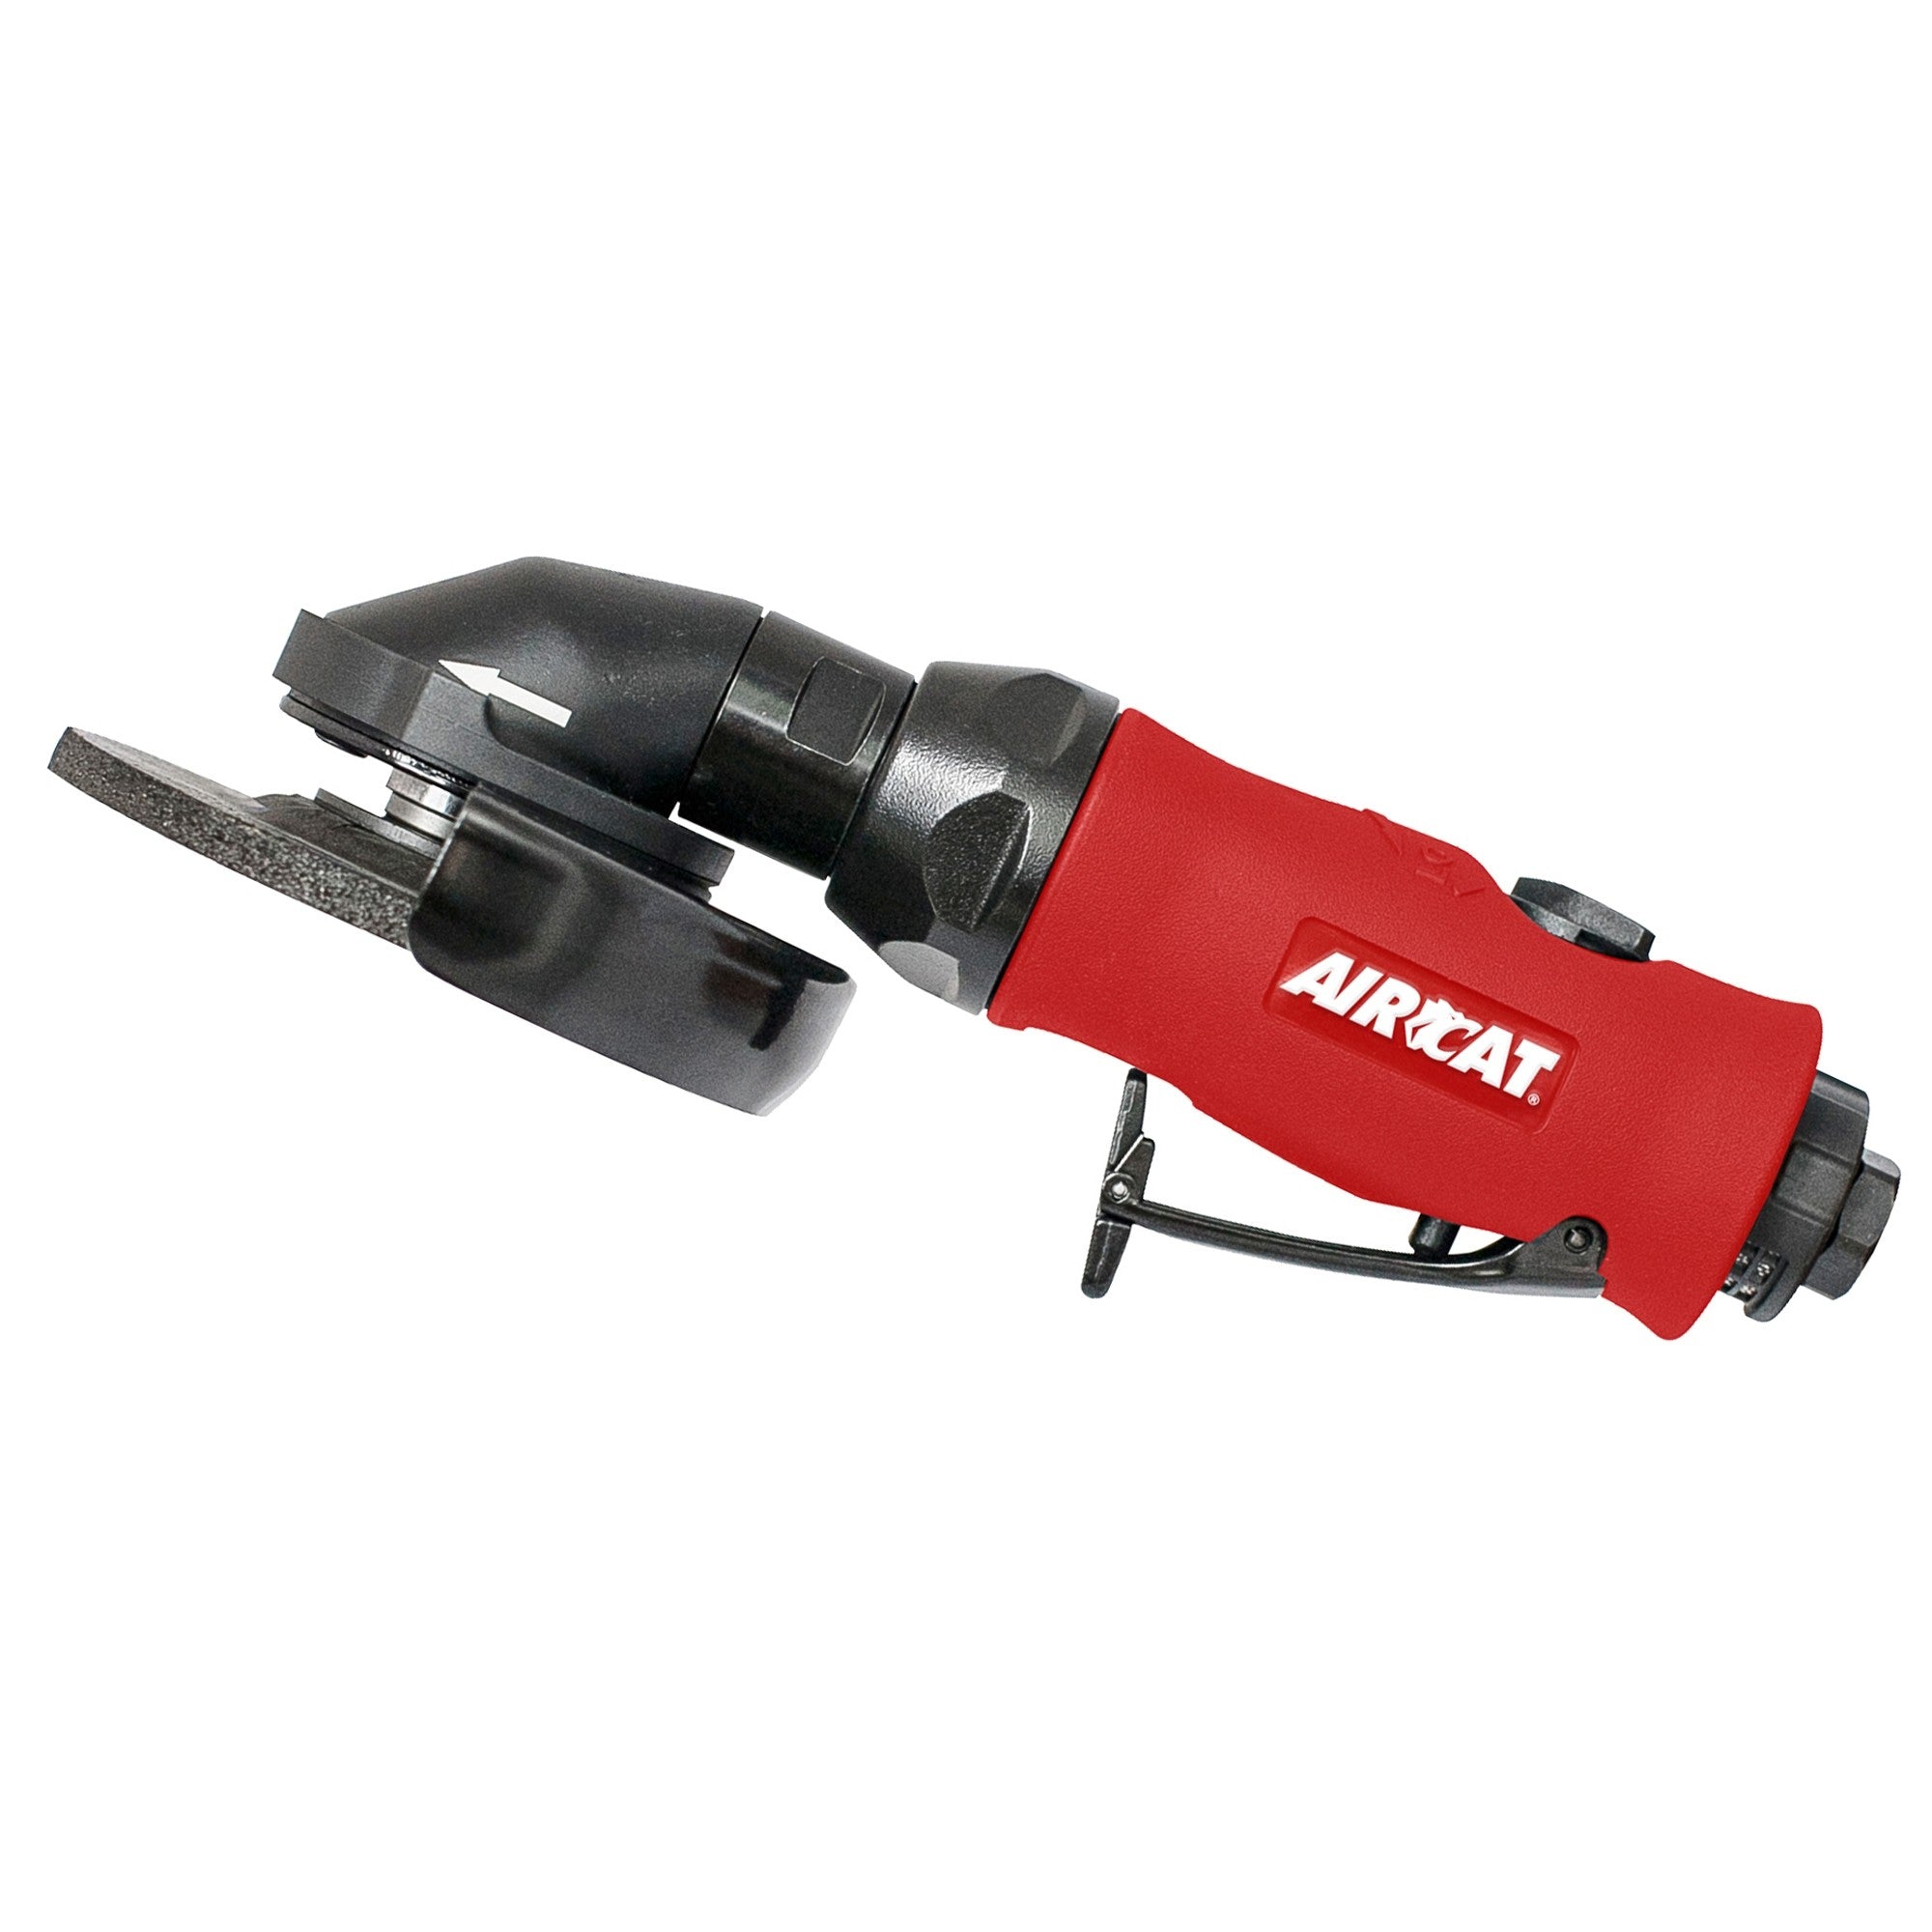 AIRCAT 4-1/2" Angle Die Grinder ARC6340 - Direct Tool Source